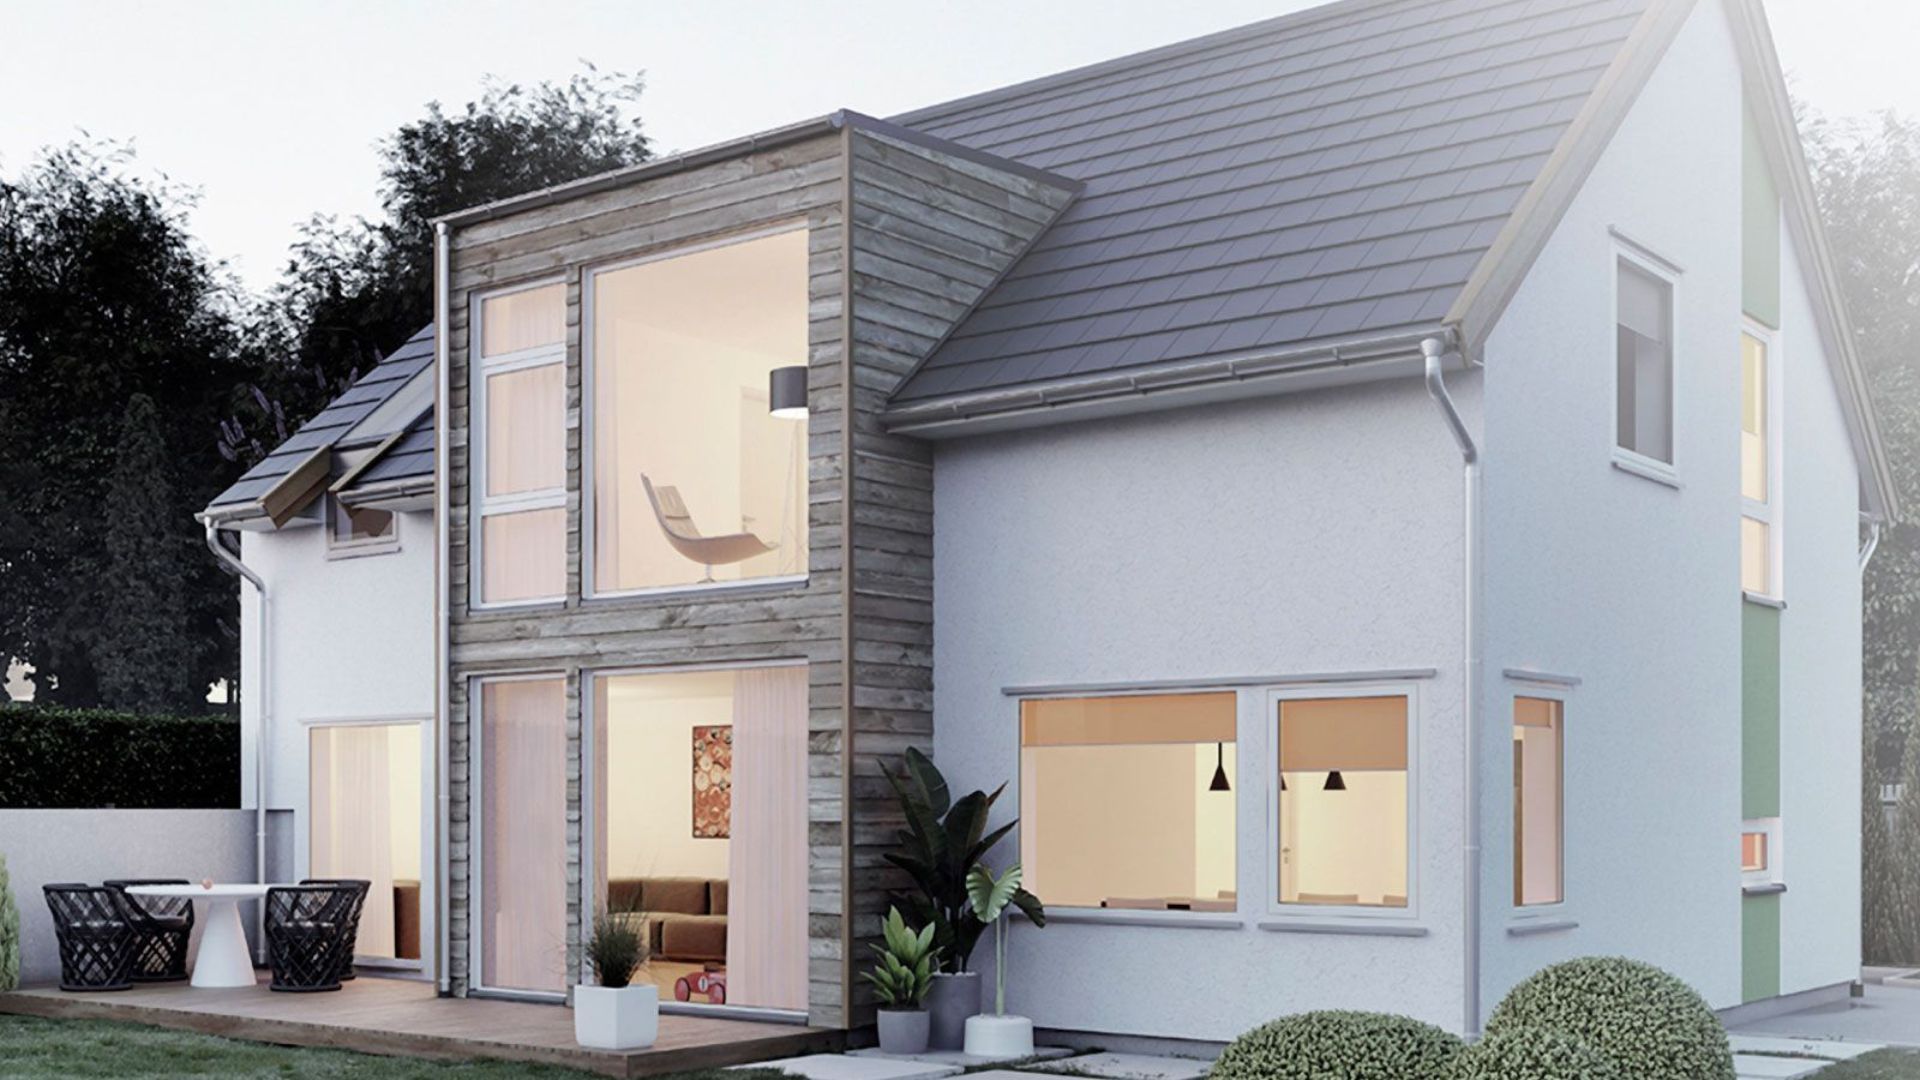 Outside view of a white smart home house with lights on on the inside